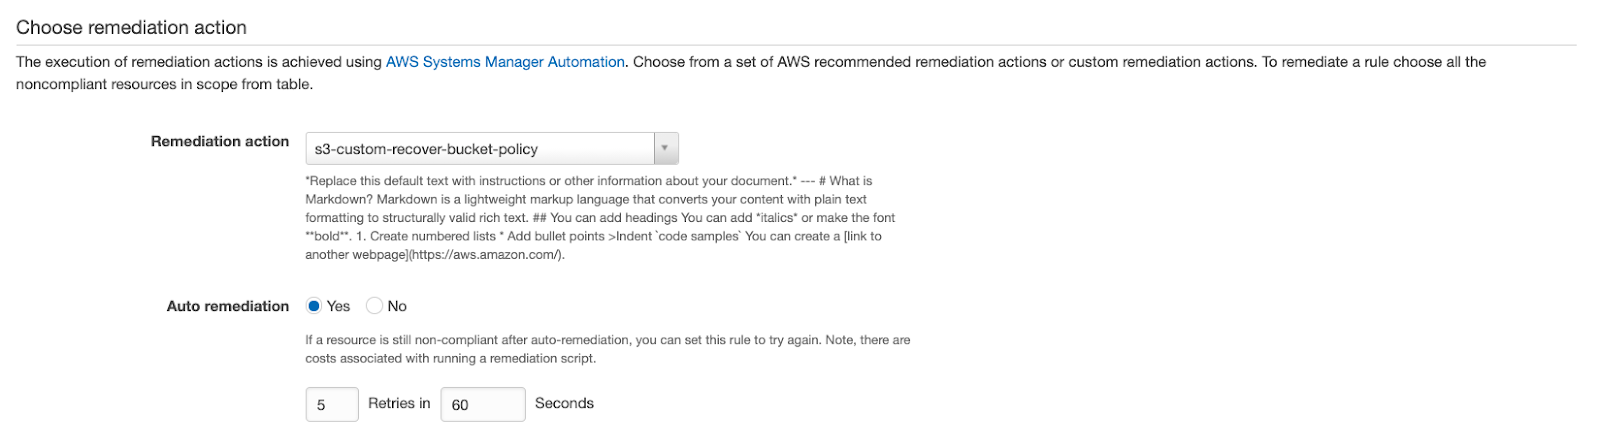 Choose remediation action

The execution of remediation actions is achieved using AWS Systems Manager Automation. Choose from a set of AWS recommended remediation actions or custom remediation actions. To remediate a rule choose all the
noncompliant resources in scope from table.

ion action 53, custom-recover-bucket-policy ,

“Replace this default text with instructions or other information about your document. -- # What is
Markdown? Markdown is a lightweight markup language that converts your content with plain text
formatting to structurally valid rich text. ## You can add headings You can add ‘italics* or make the font
“bold™. 1. Create numbered lists * Add bullet points >Indent ‘code samples’ You can create link to
another webpagel(https://aws.amazon.com)

Auto remediation @ Yes No

fa resource is still non-compliant after auto-remediation, you can set this rule to try again. Note, there are
costs associated with running a remediation script.

5 Retries in 60 Seconds